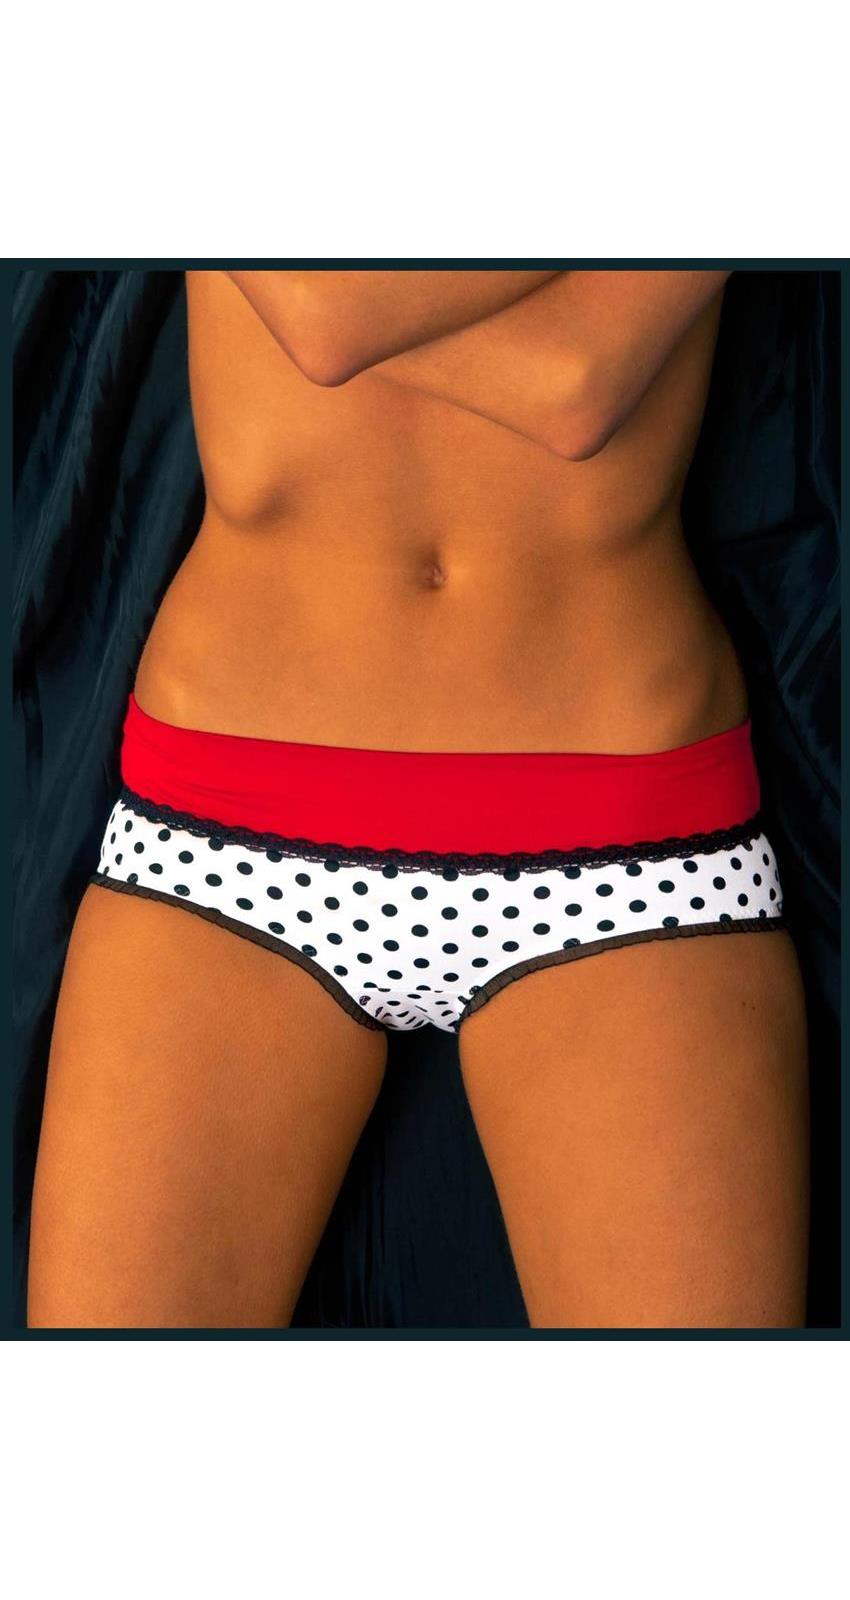 Fearless and Fun (FAF) Women's Polka Dot Jersey Hipster Panties - White/Red/Black - L for Valentines Day